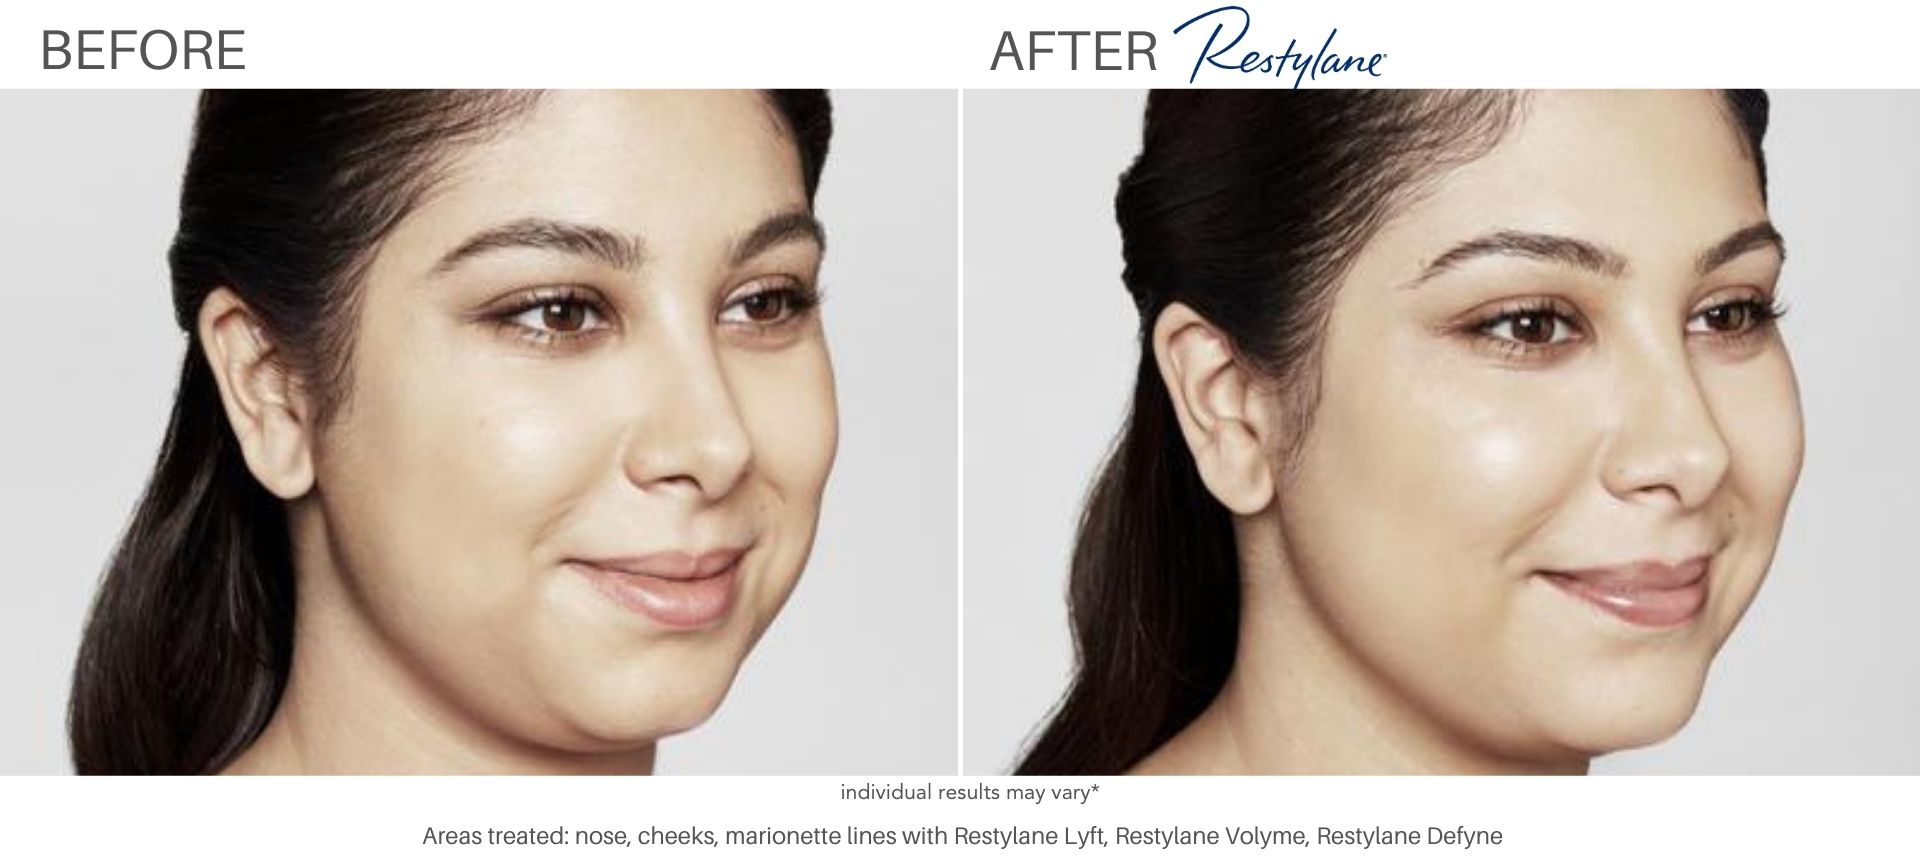 Woman's before and after results from Juvederm injections.